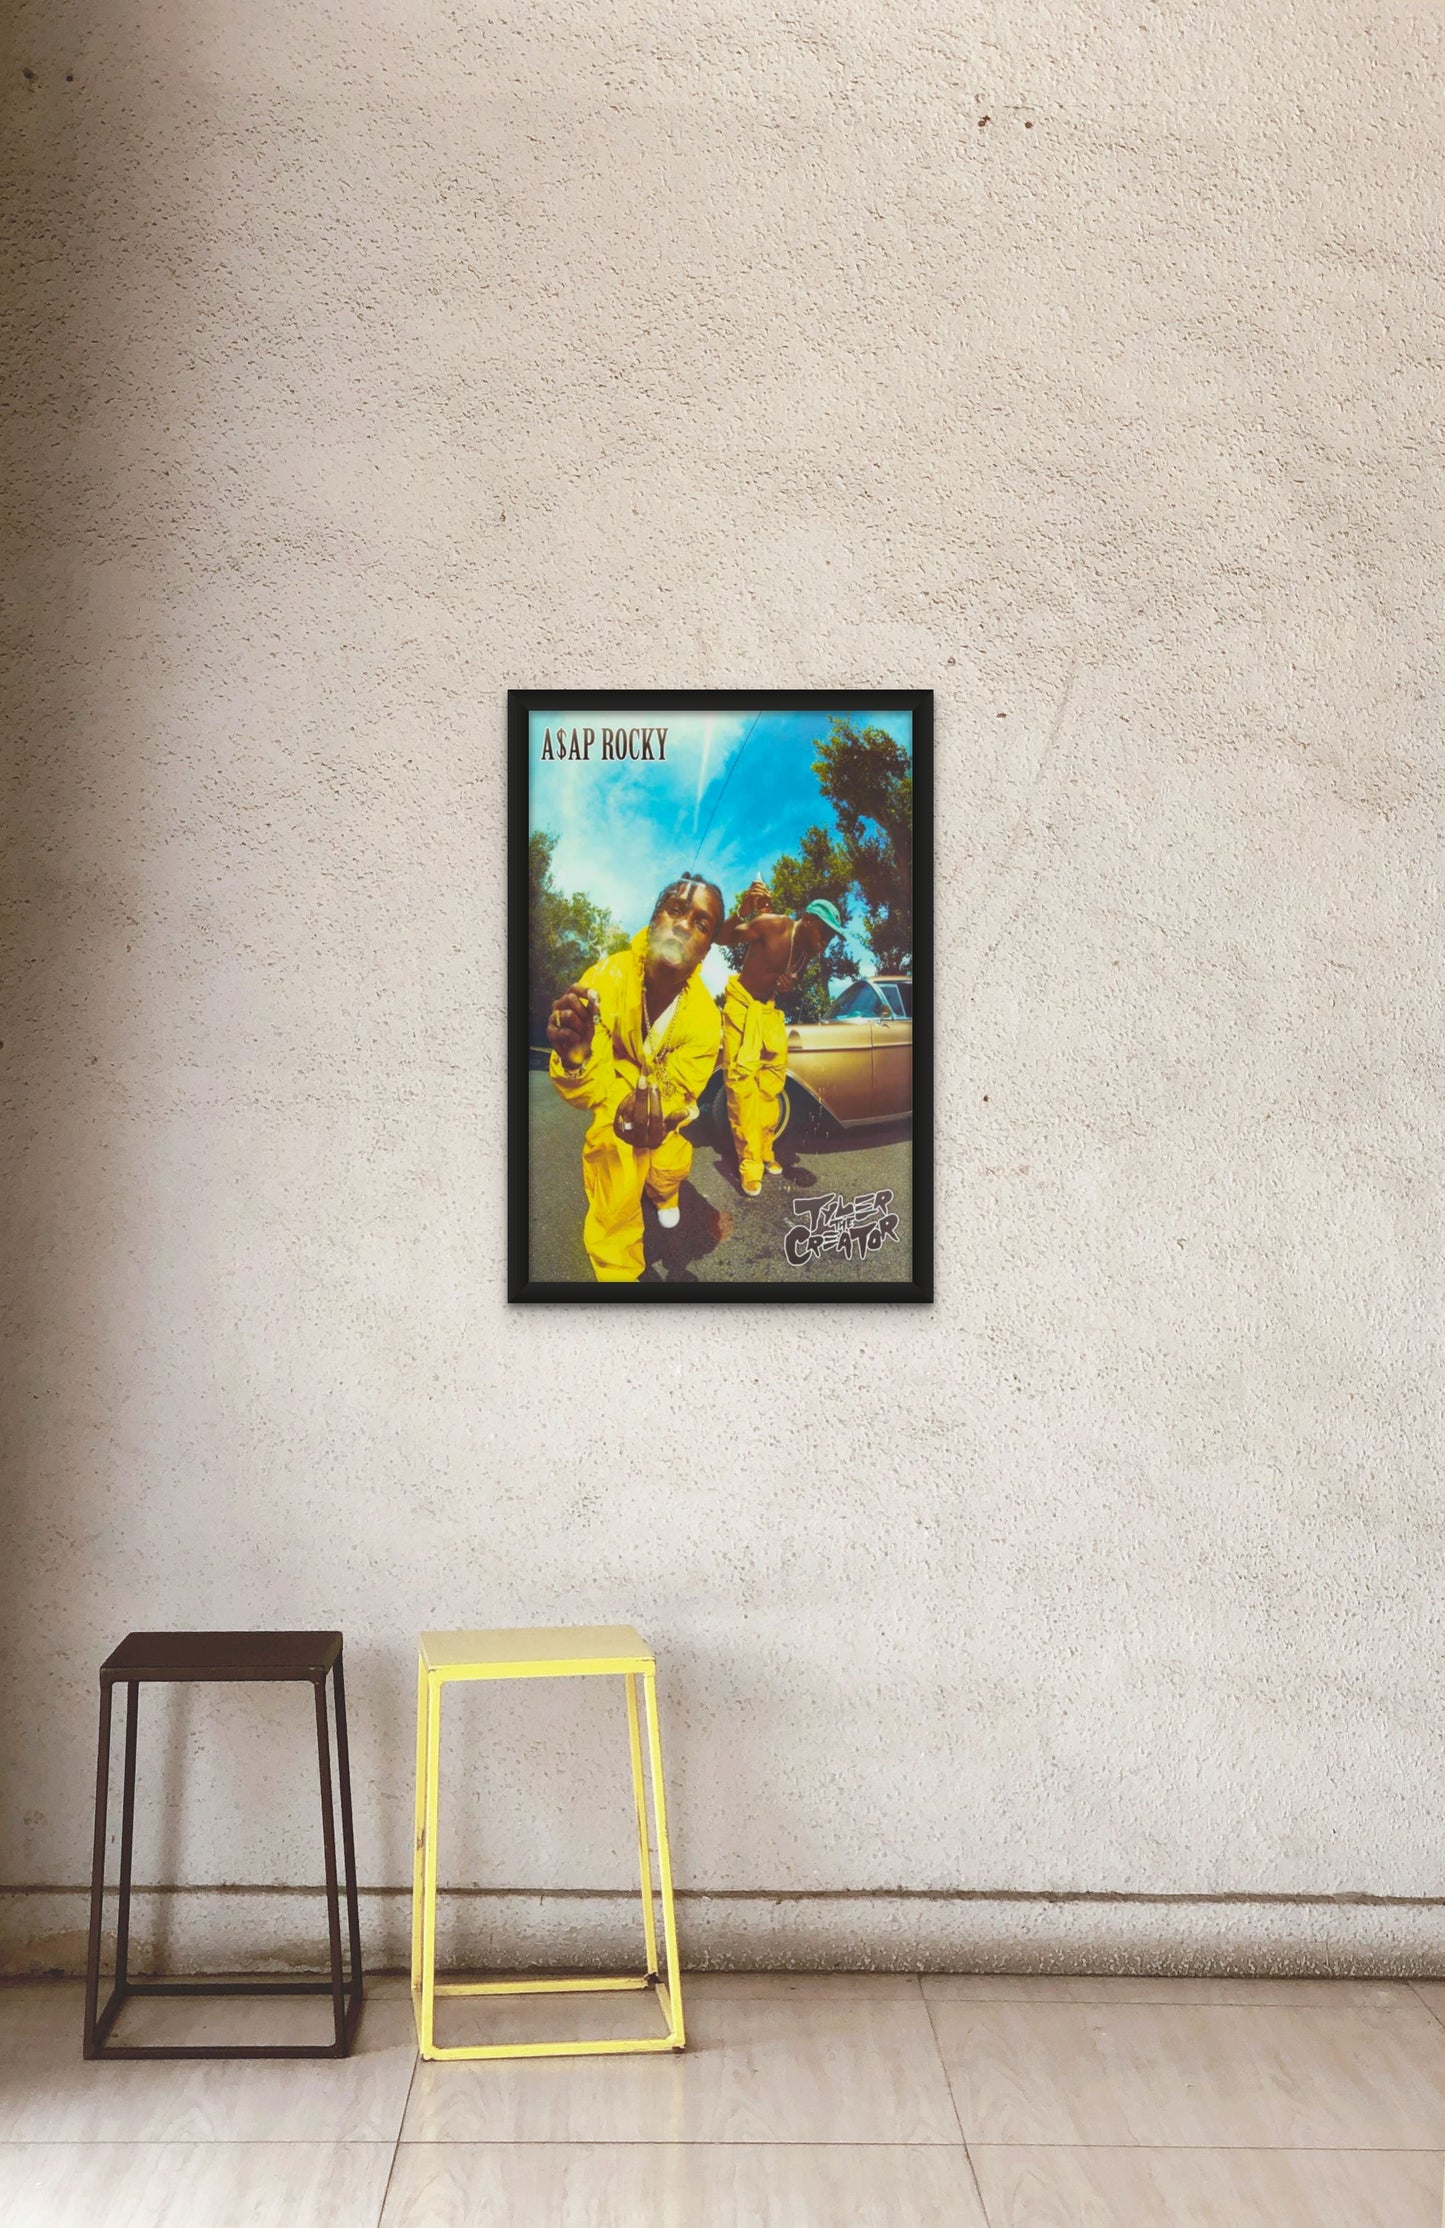 Tyler, The Creator & A$AP Rocky - Poster and Wrapped Canvas